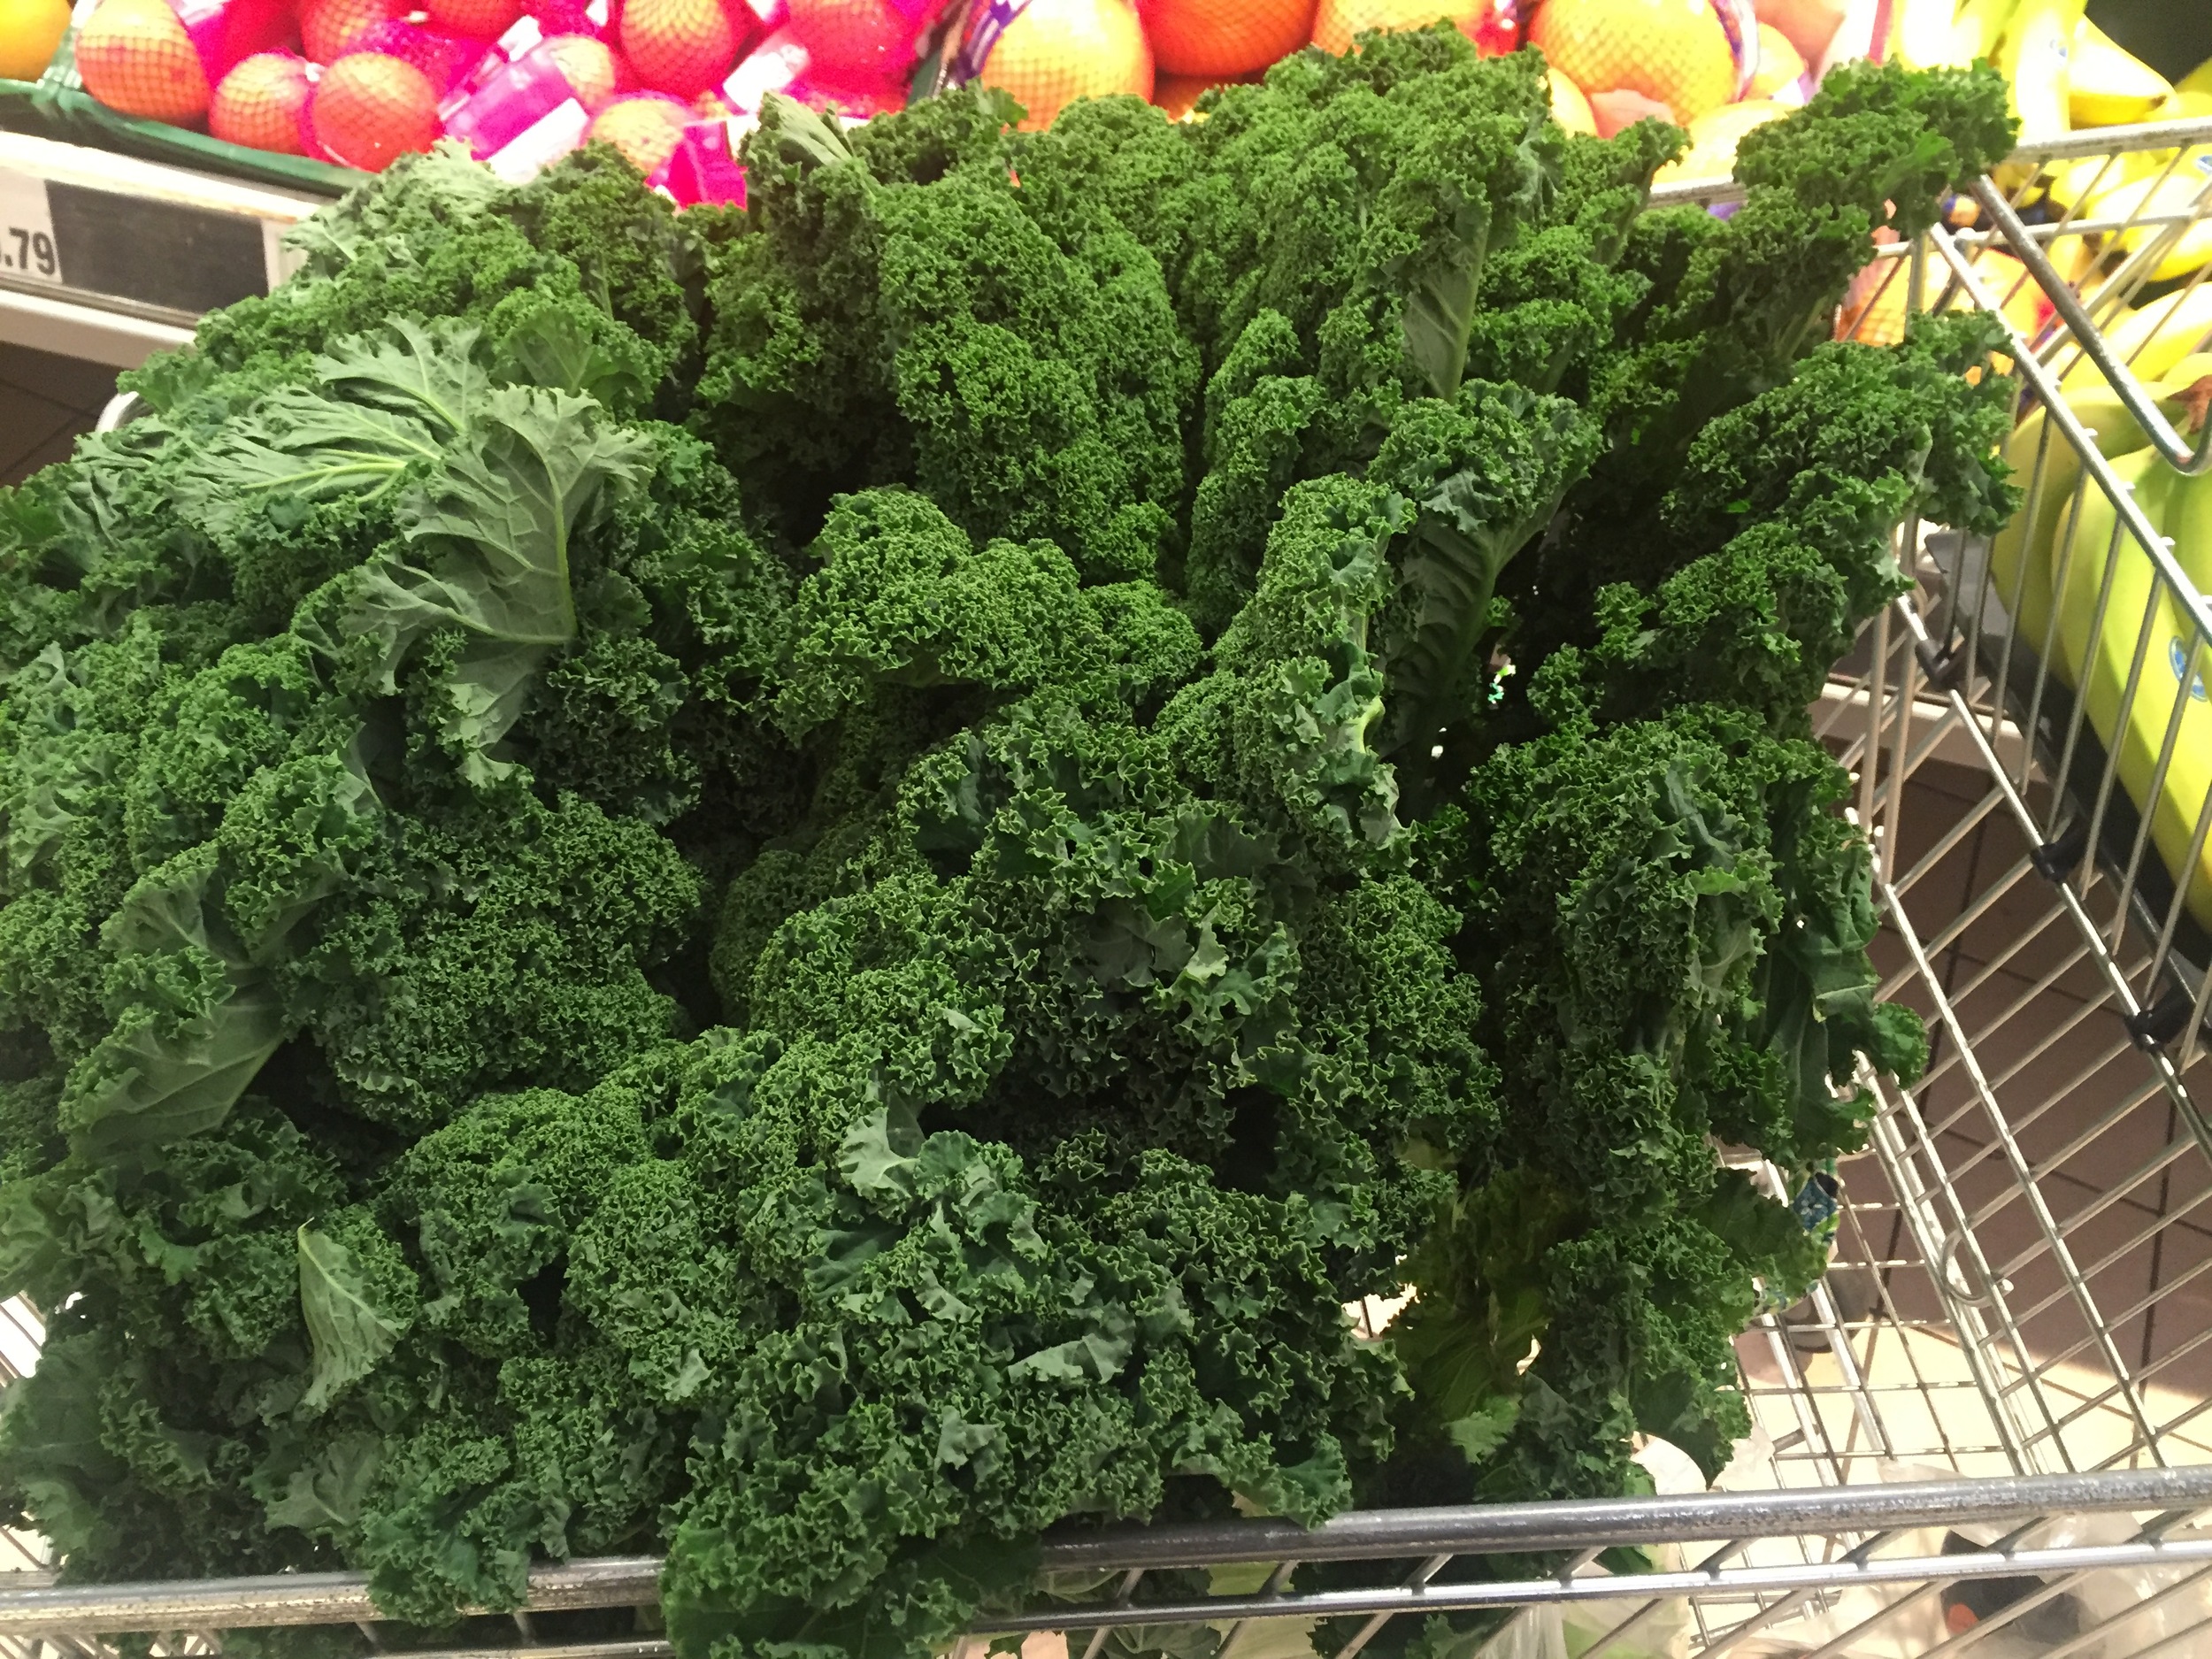 Yes, thats a grocery cart filled with kale, beautiful isn't it?